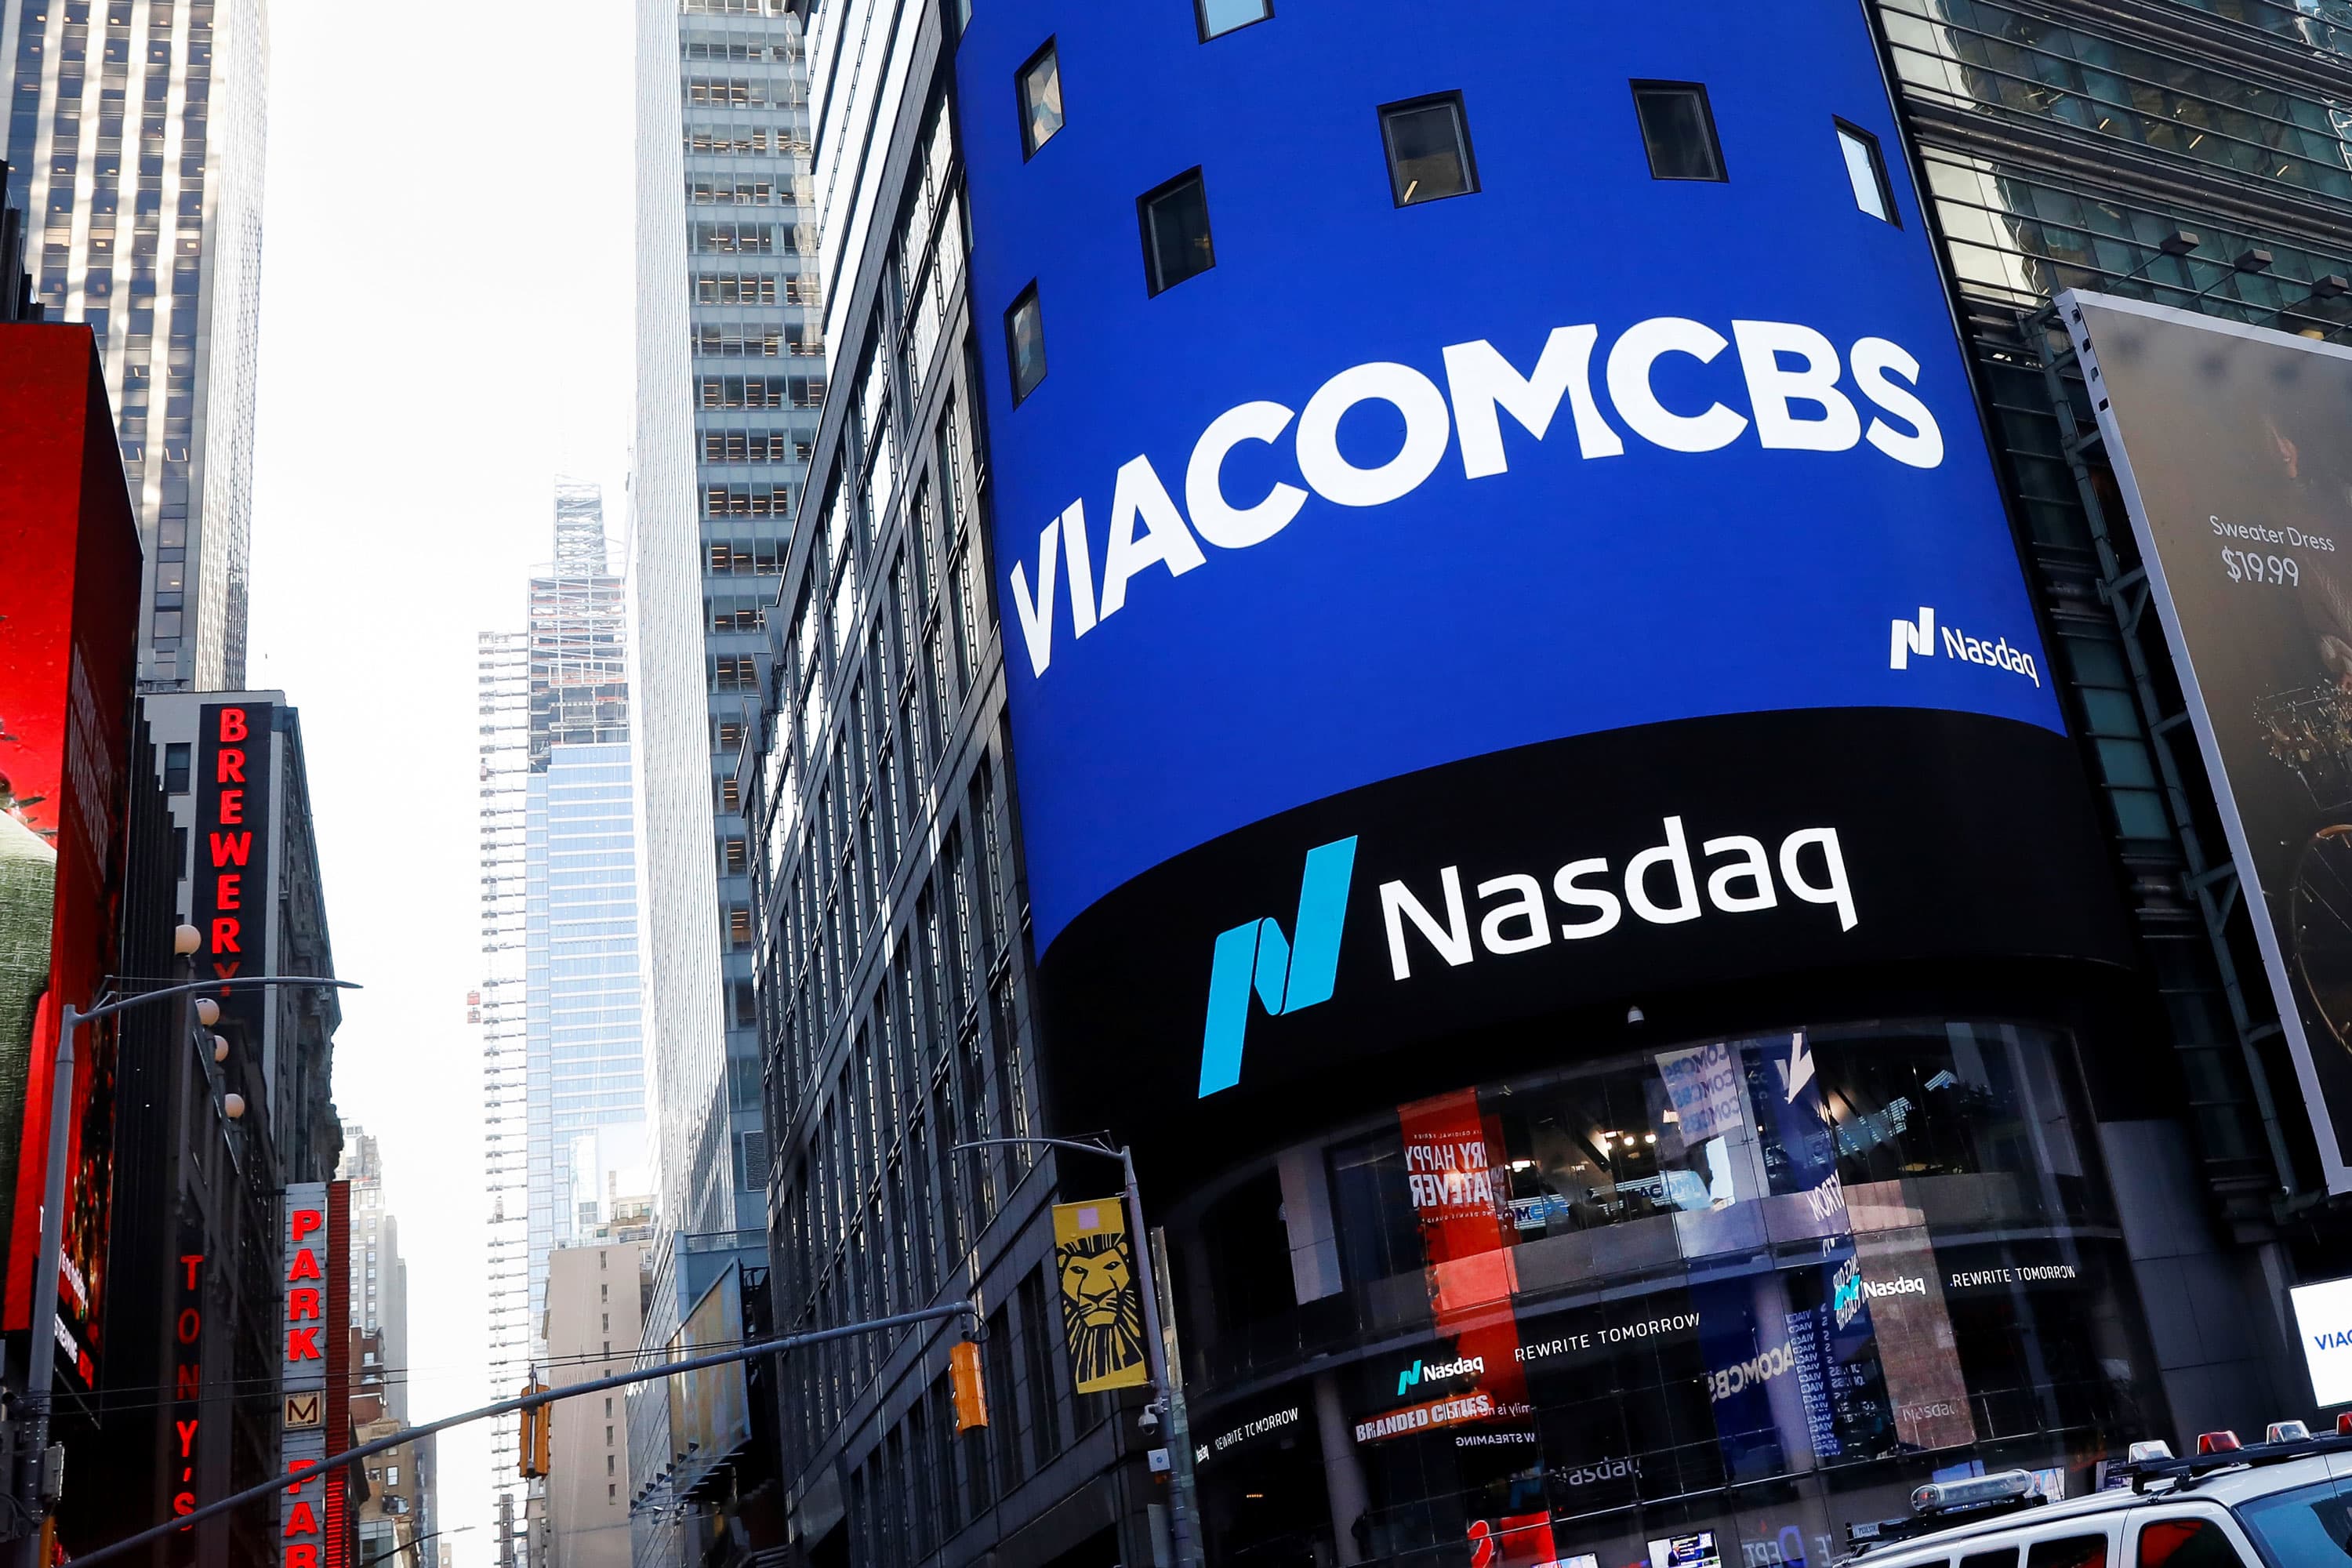 Archegos Capital Forced Position Liquidation Contributes To Viacom Discovery Plunge